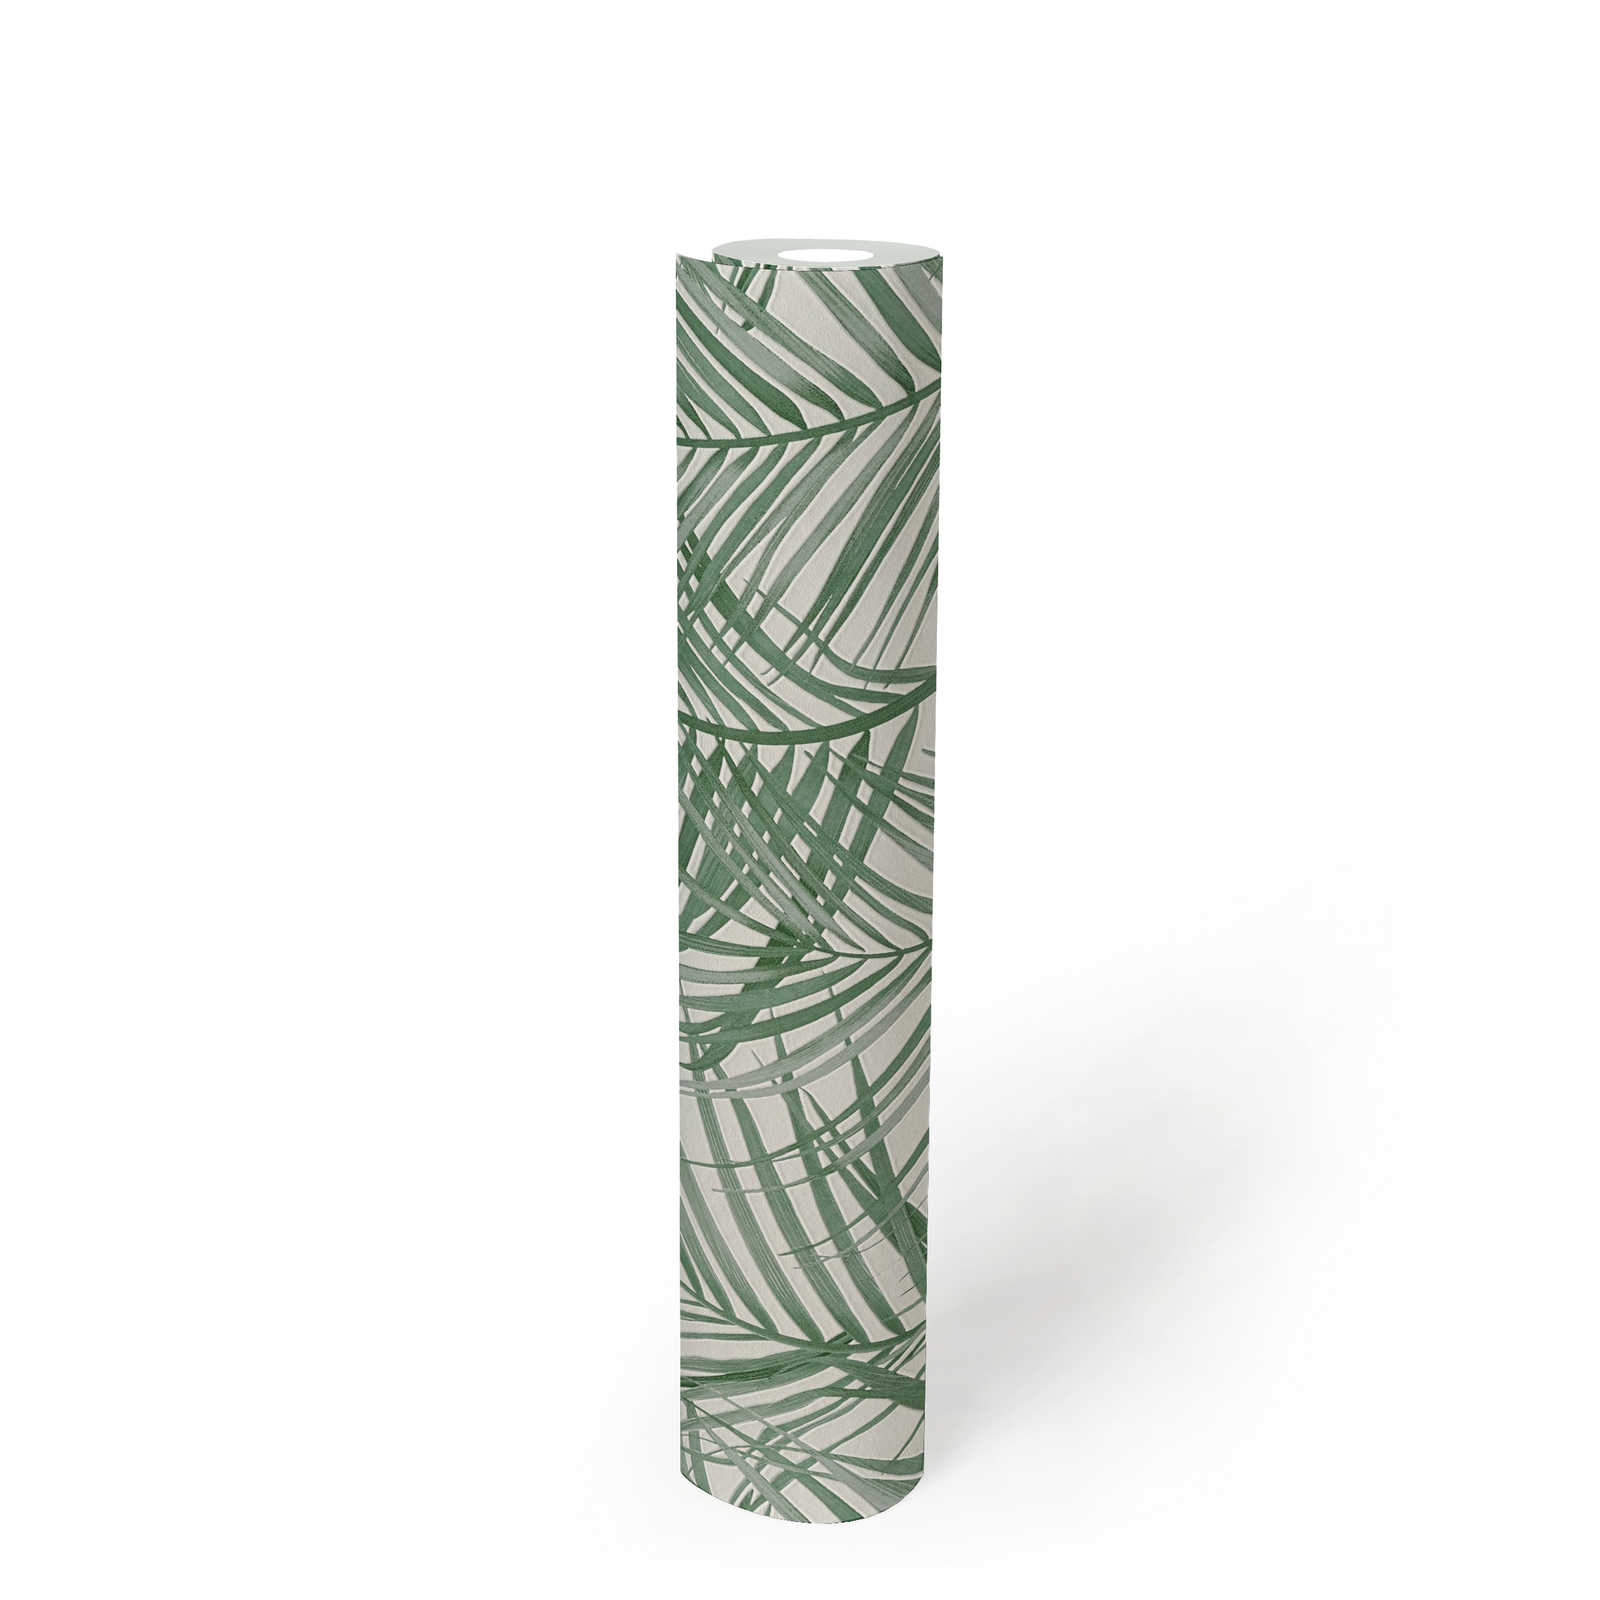             Non-woven wallpaper with large palm tree pattern - green, white
        